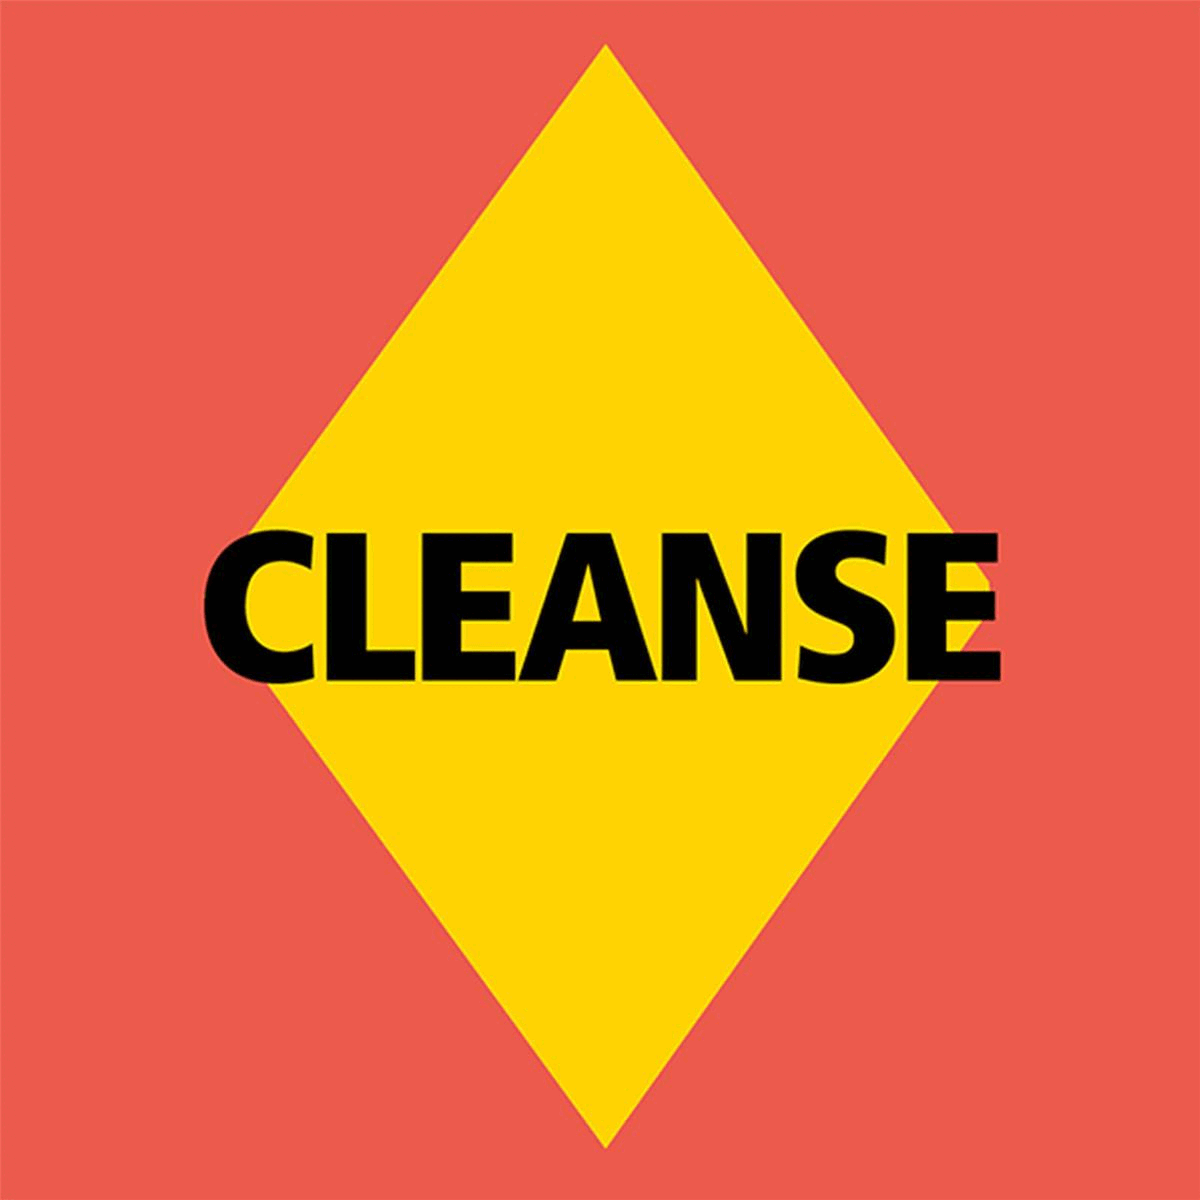 Cleanse, Acnecide kills up to 95% of spot-causing bacteria